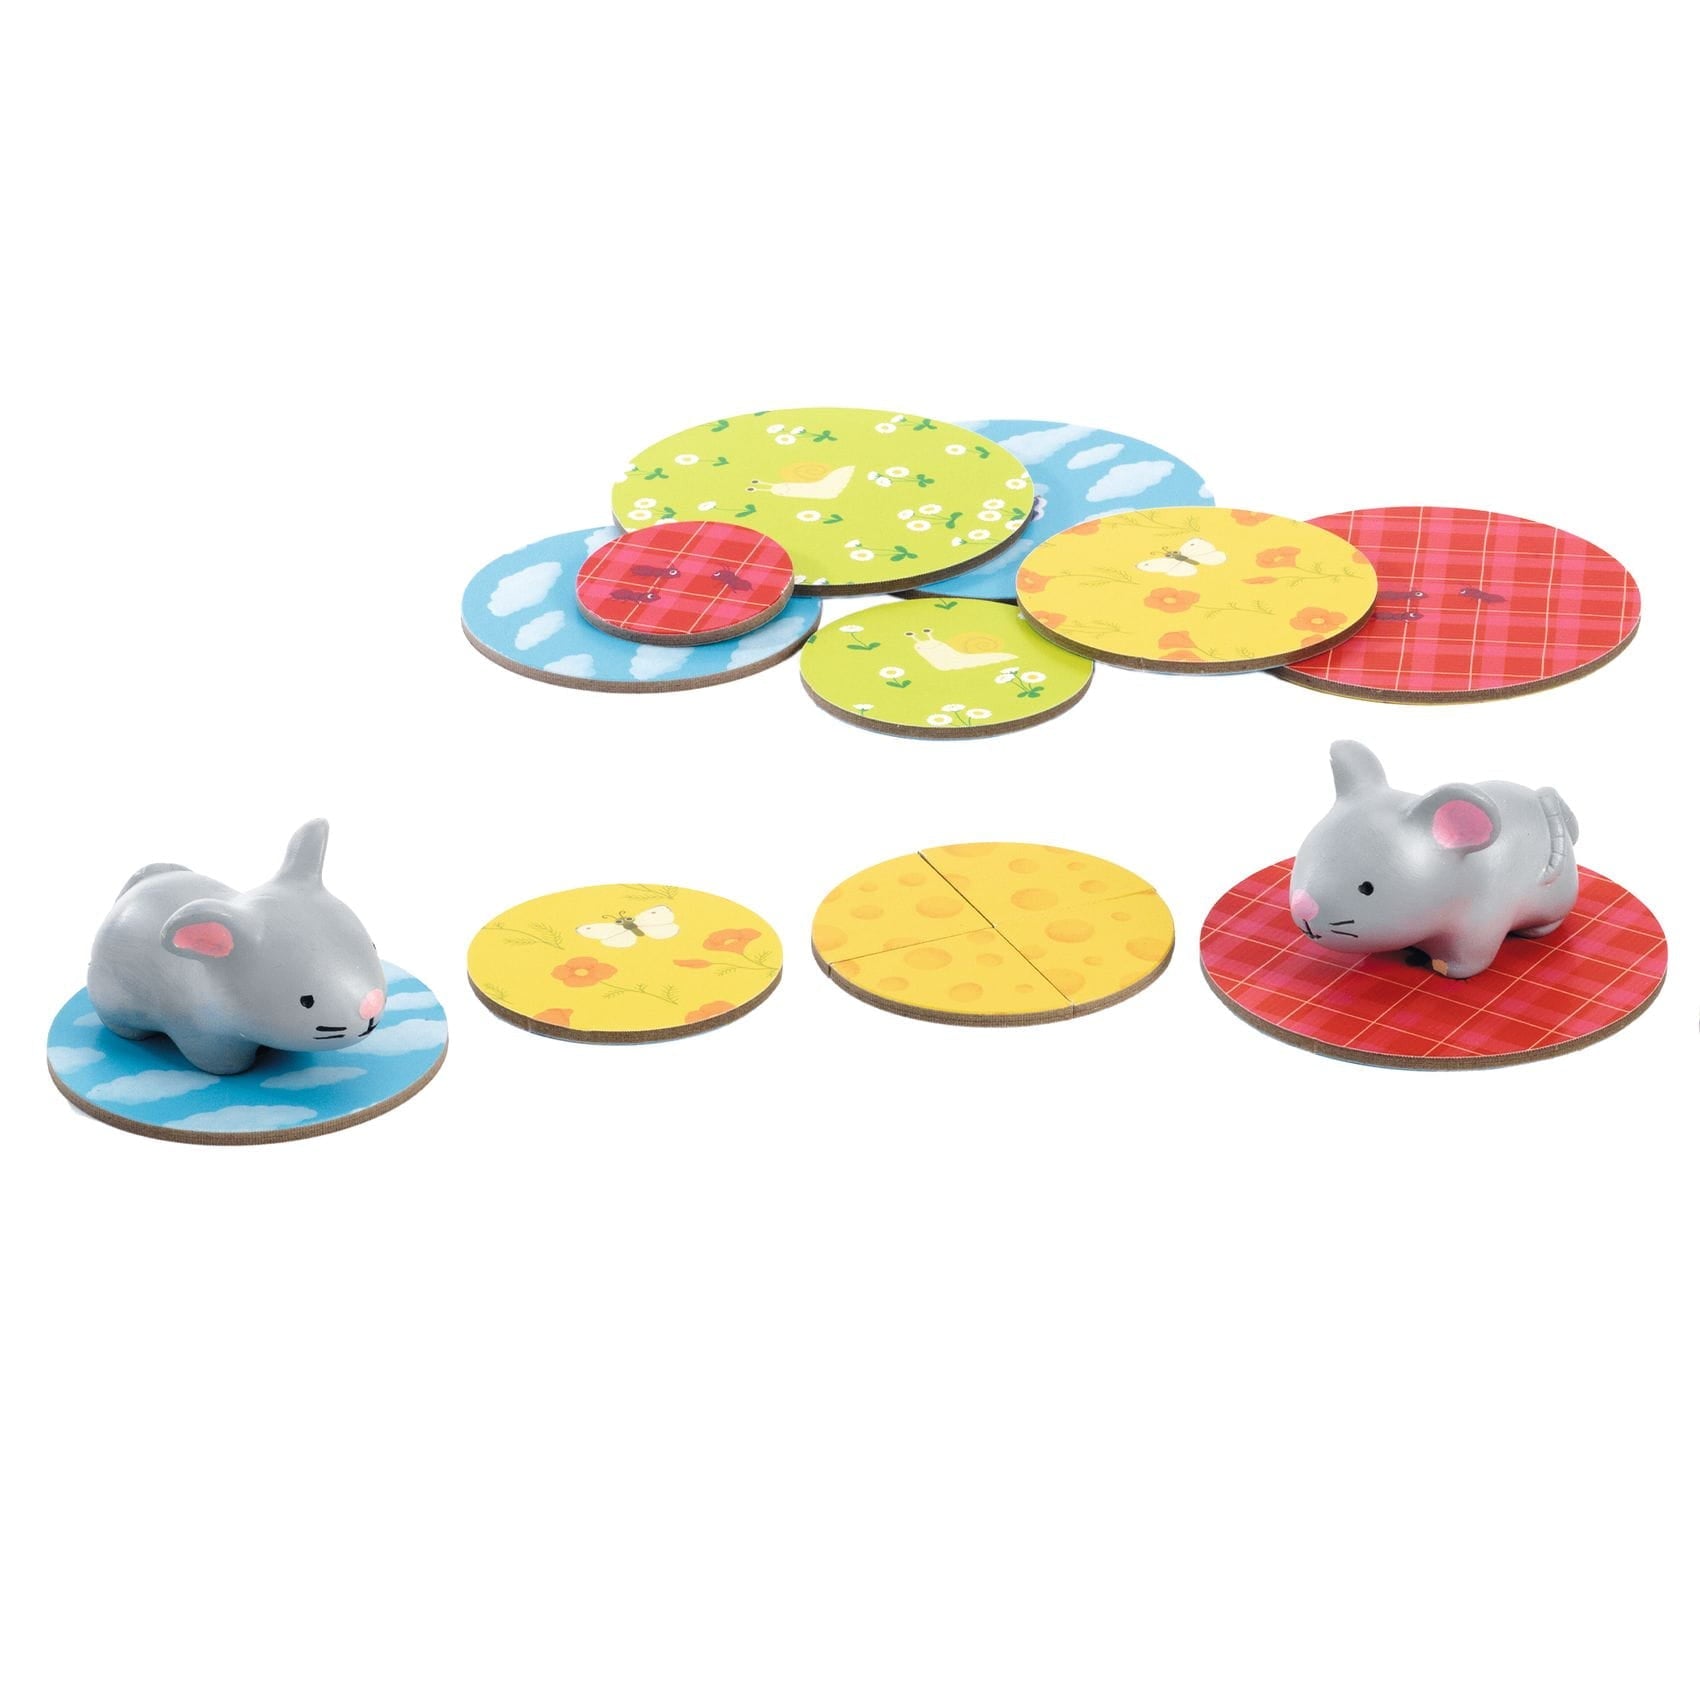 DJECO: Luck Lucky Mouse and Cheese Board Game